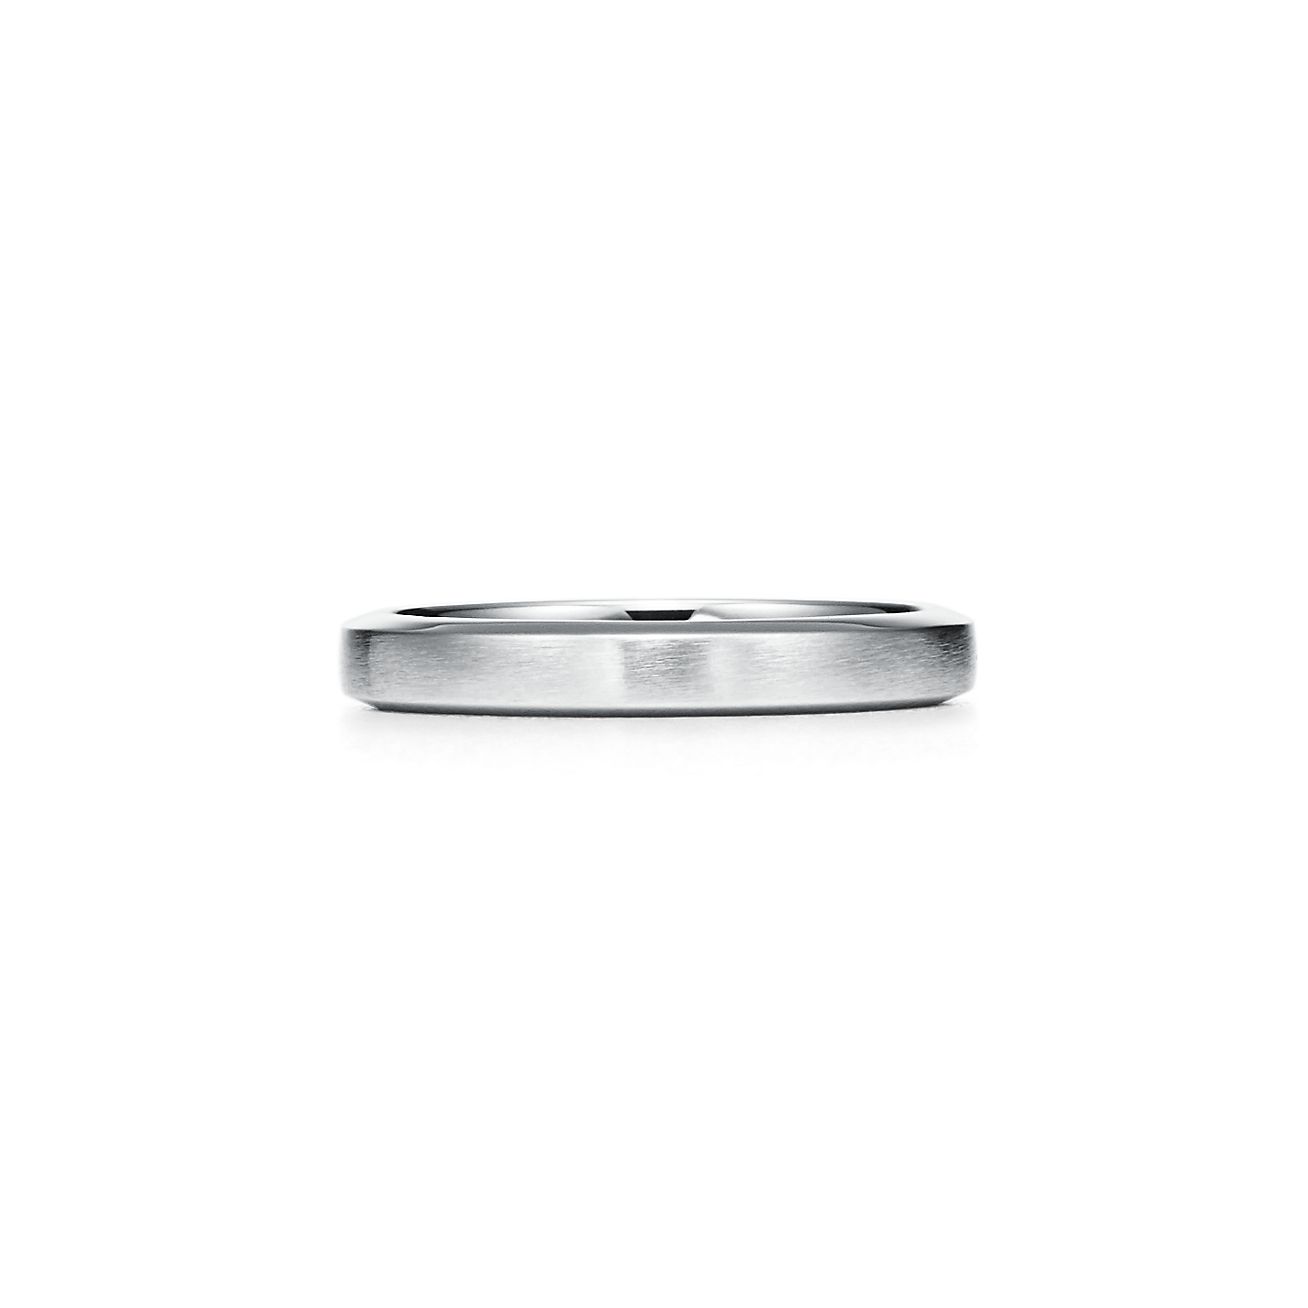 tiffany and co ring band